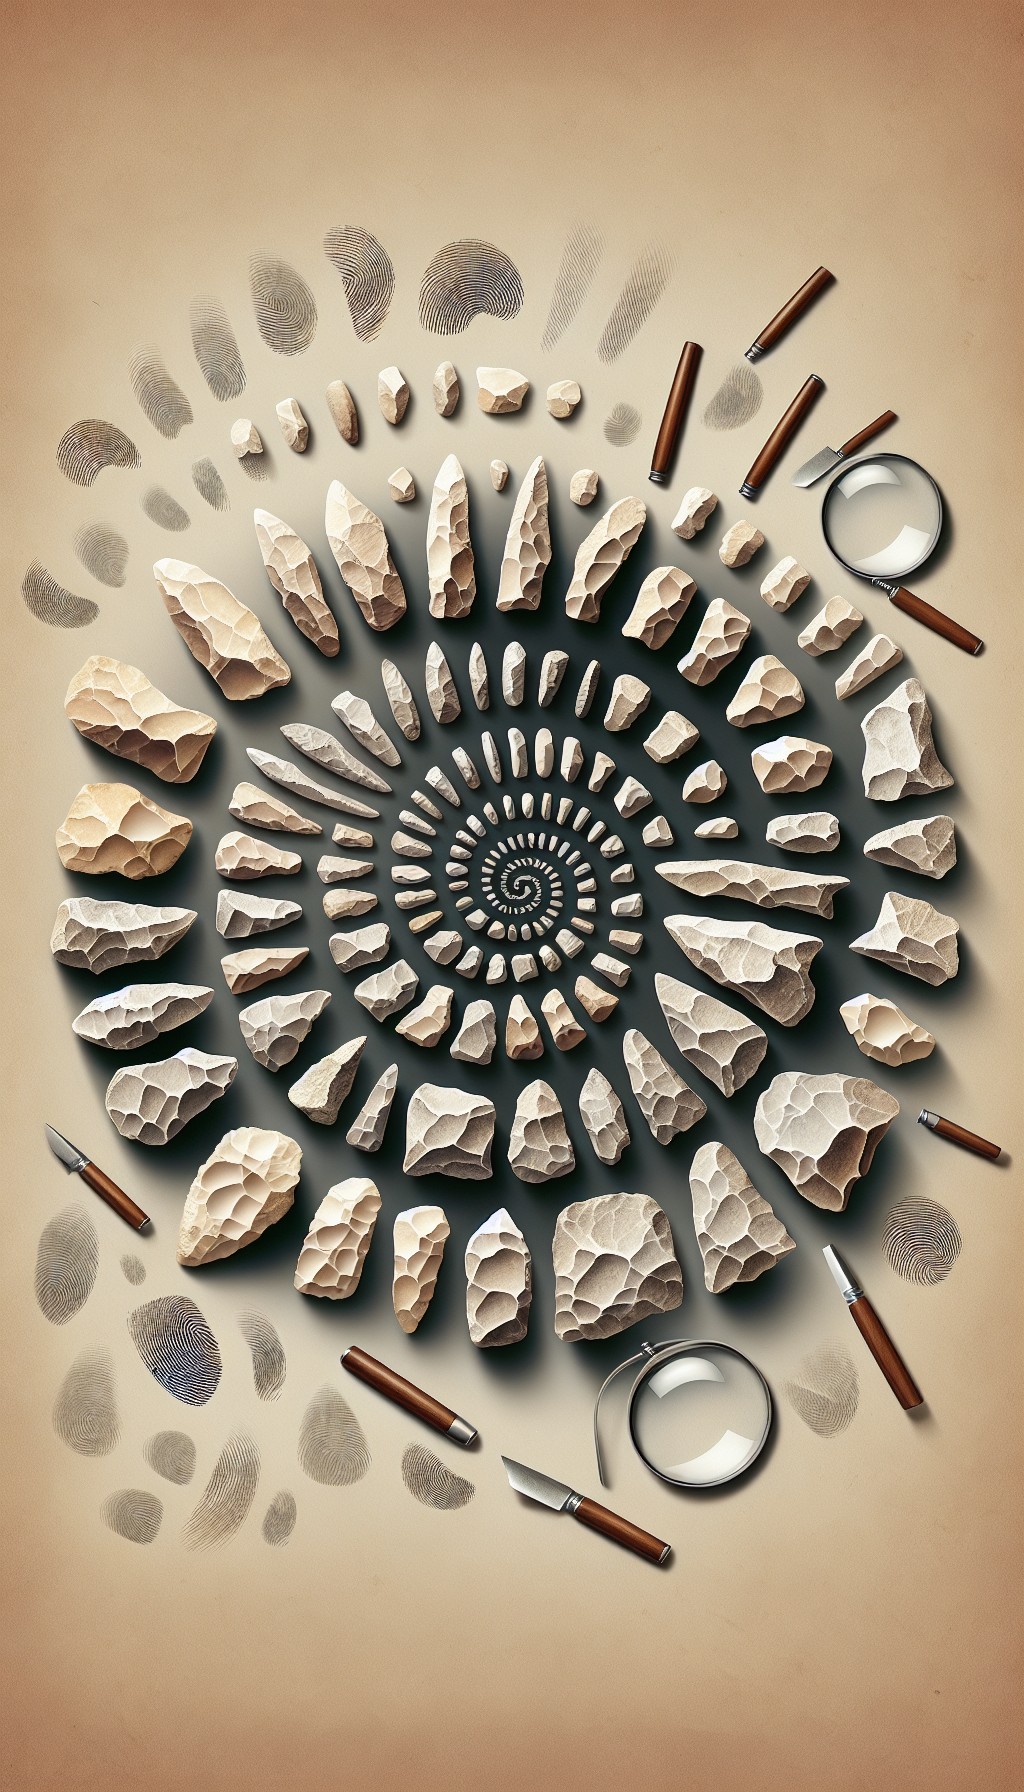 An illustration displaying a spiraling timeline, with hand-drawn sketches of stone tools evolving from simplistic chipped flints to complex polished axes, overlaid with translucent, modern fingerprints and magnifying glass segments, symbolizing the meticulous identification process undertaken by archaeologists. The transitions between tools feature a subtle gradient, illustrating the passage of time in the study of these ancient artifacts.